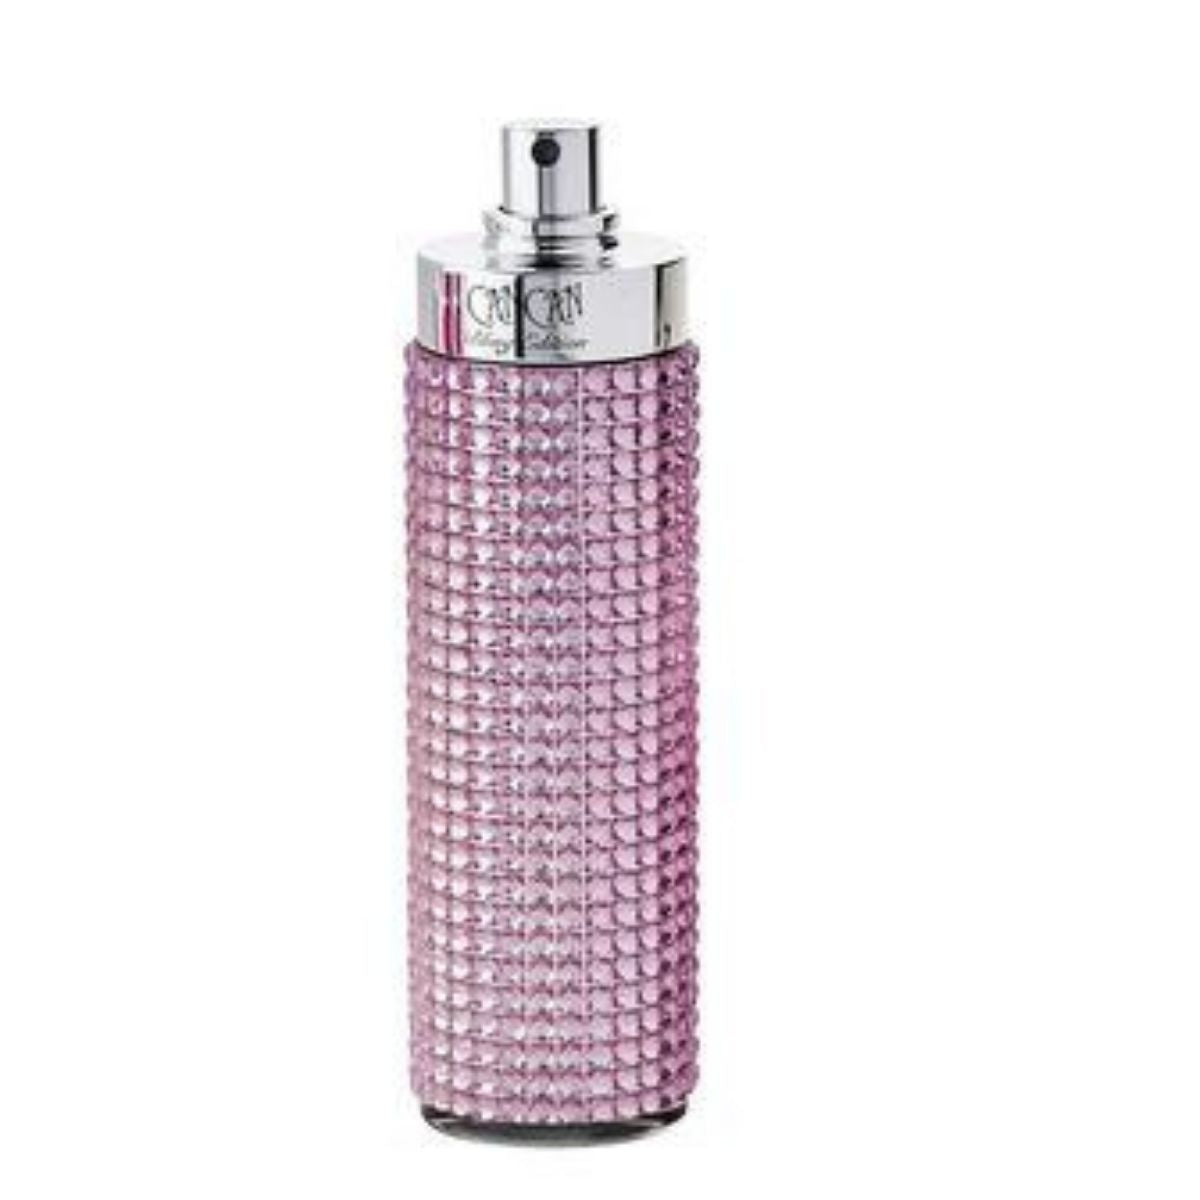 Can Can Bling Tester (Sin Tapa) Edp 100ml Mujer